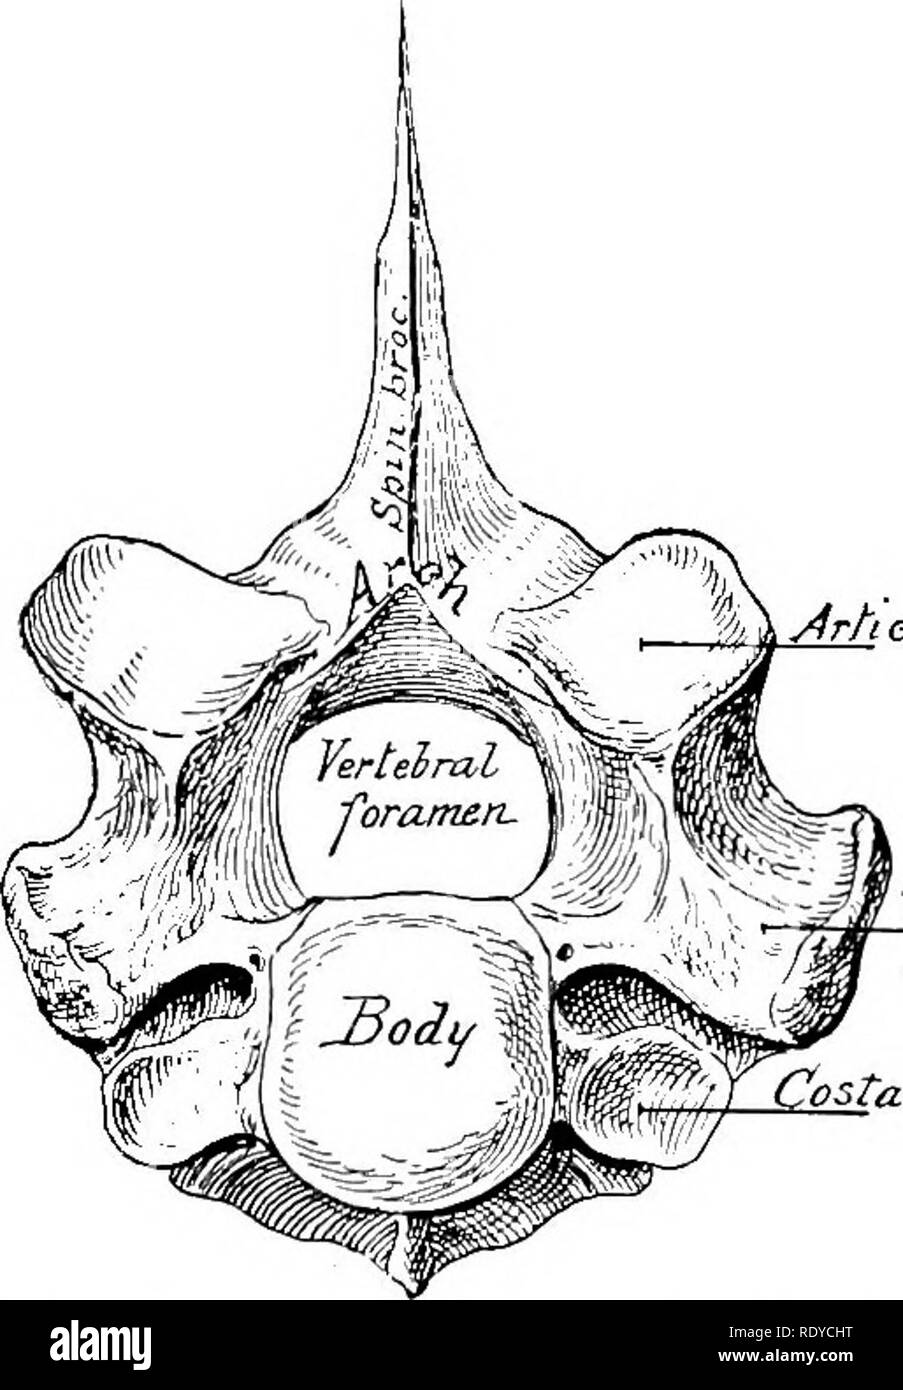 . The anatomy of the domestic animals . Veterinary anatomy. 26 OSTEOLOGY a common plan of structure, which must first be understood. The parts of which a vertebra consists are the body, the arch, and the processes. The body (Corpus vertebras) is the more or less cylindrical mass on which the other parts are constructed. The anterior and posterior extremities of the body are attached to the adjacent vertebrae by intervertebral fibro-cartilages, and are usually convex and concave respectively. The dorsal surface is flattened and enters into the formation of the vertebral canal, while the ventral Stock Photo